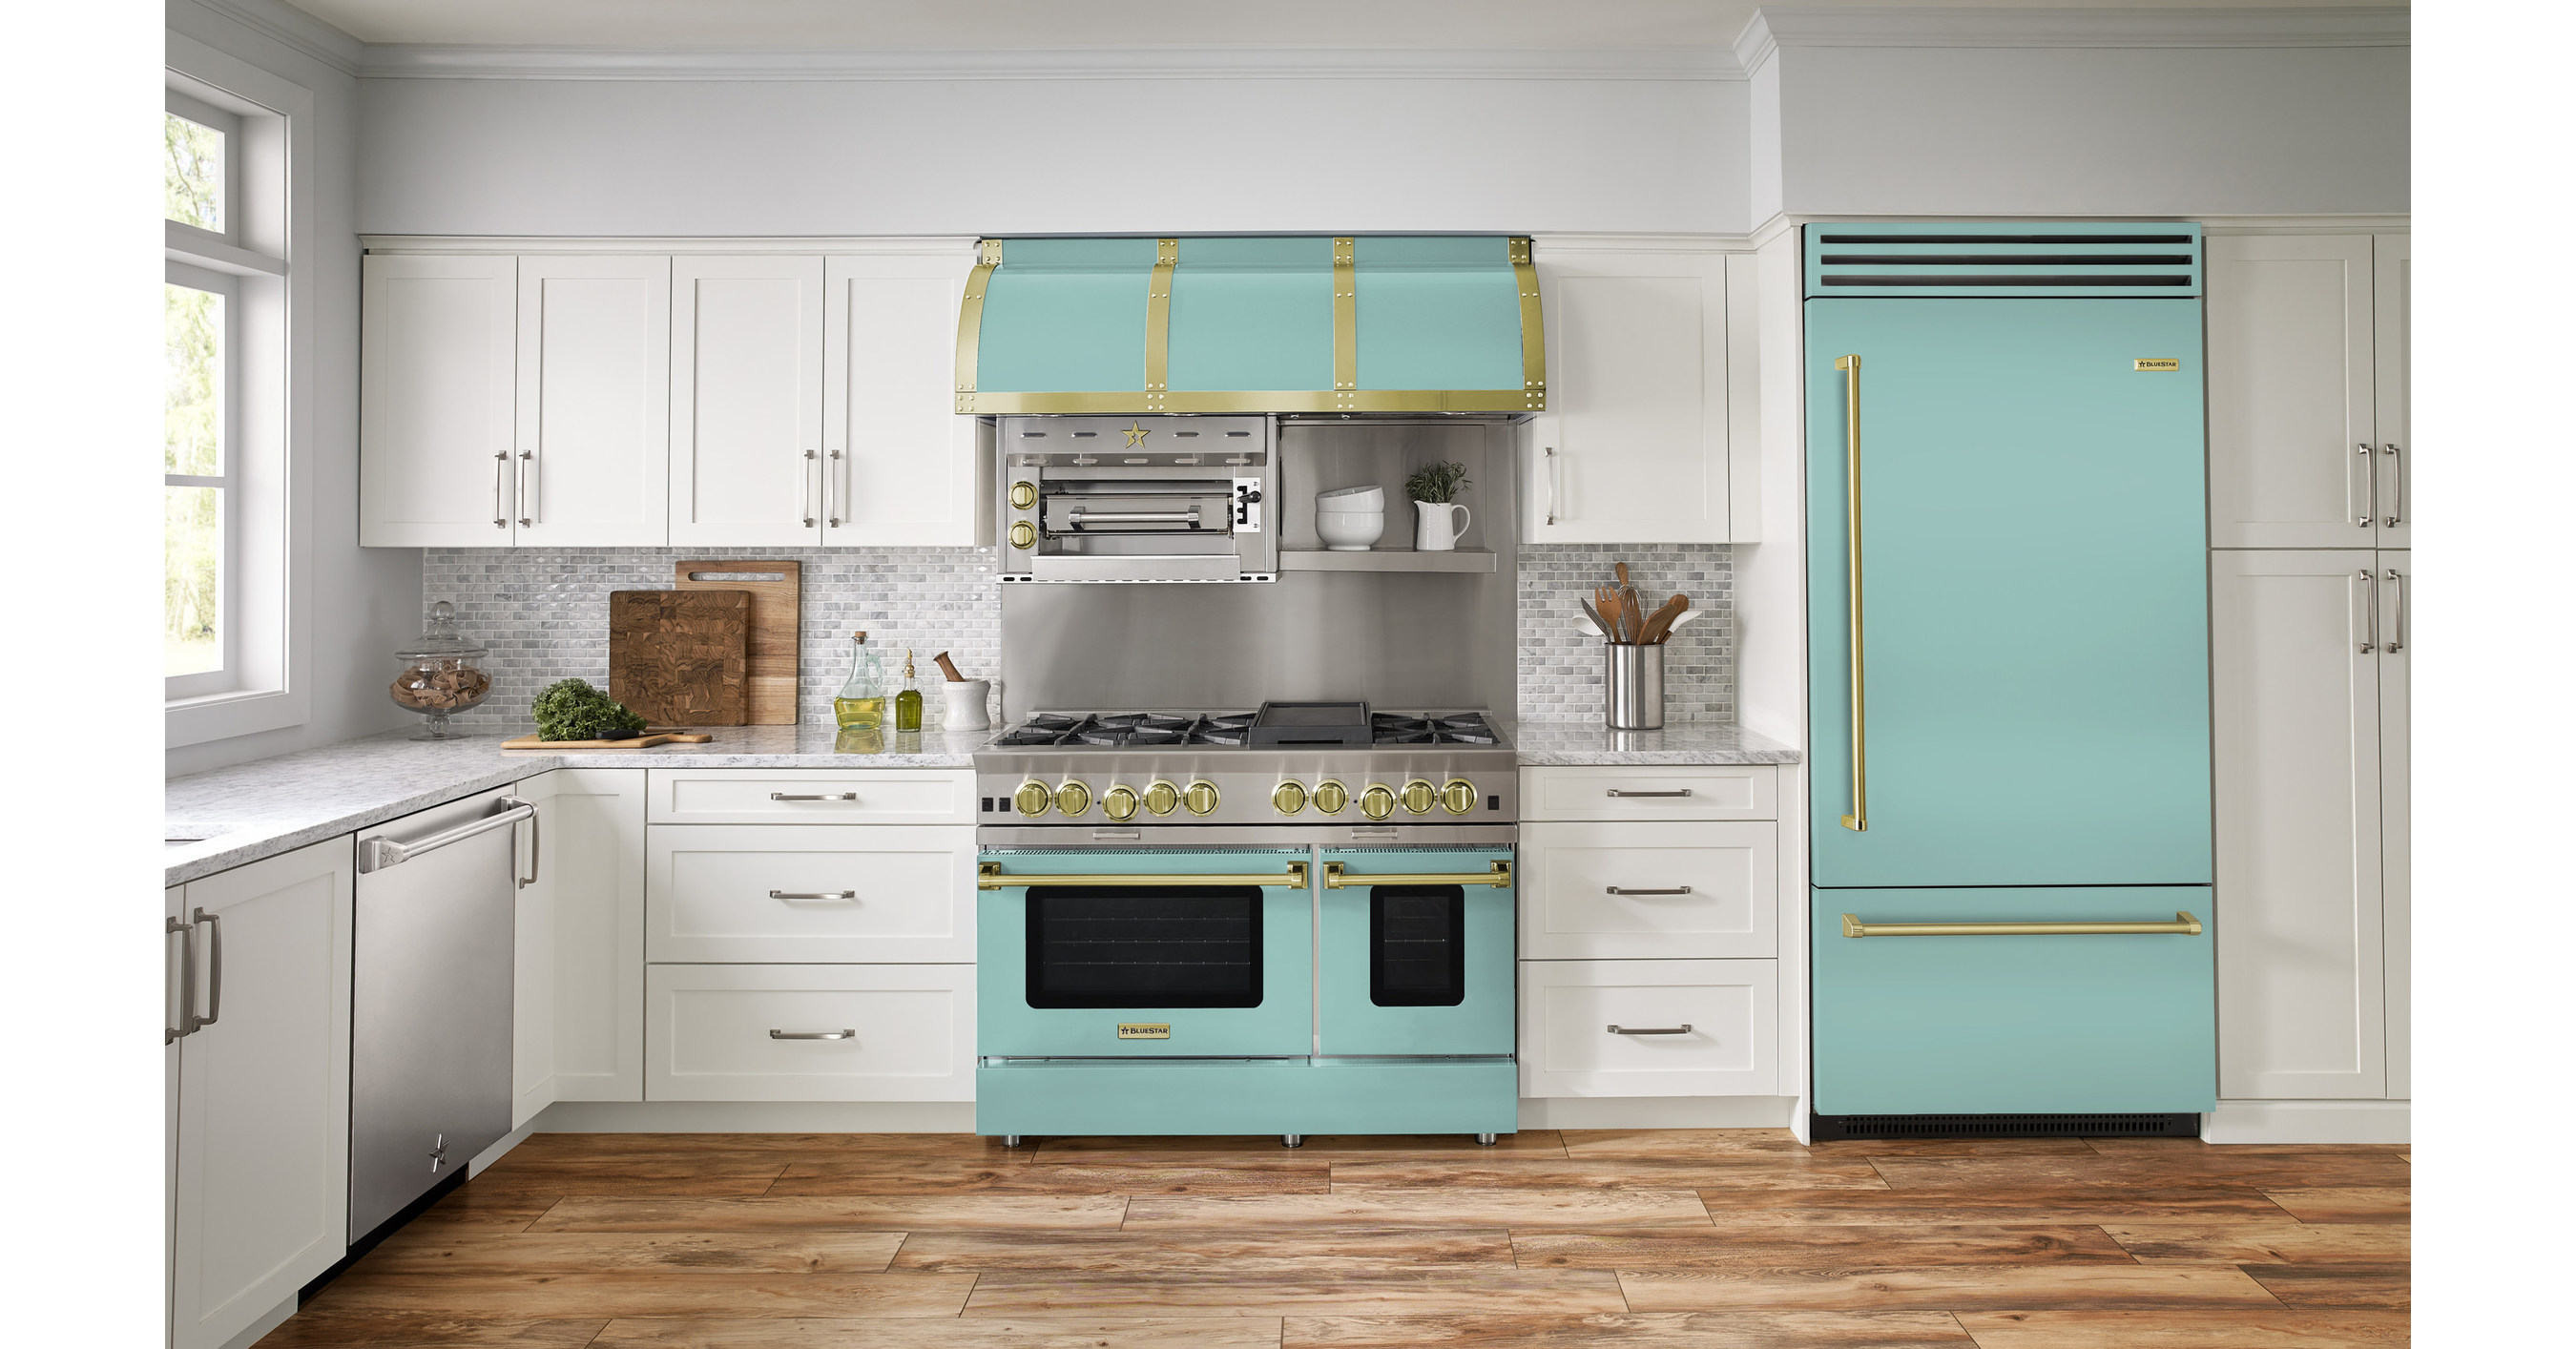 BlueStar Debuts 2021 Color of the Year for Kitchen Home Appliances: Light  Aqua Green Infuses the Kitchen with Joy & Optimism